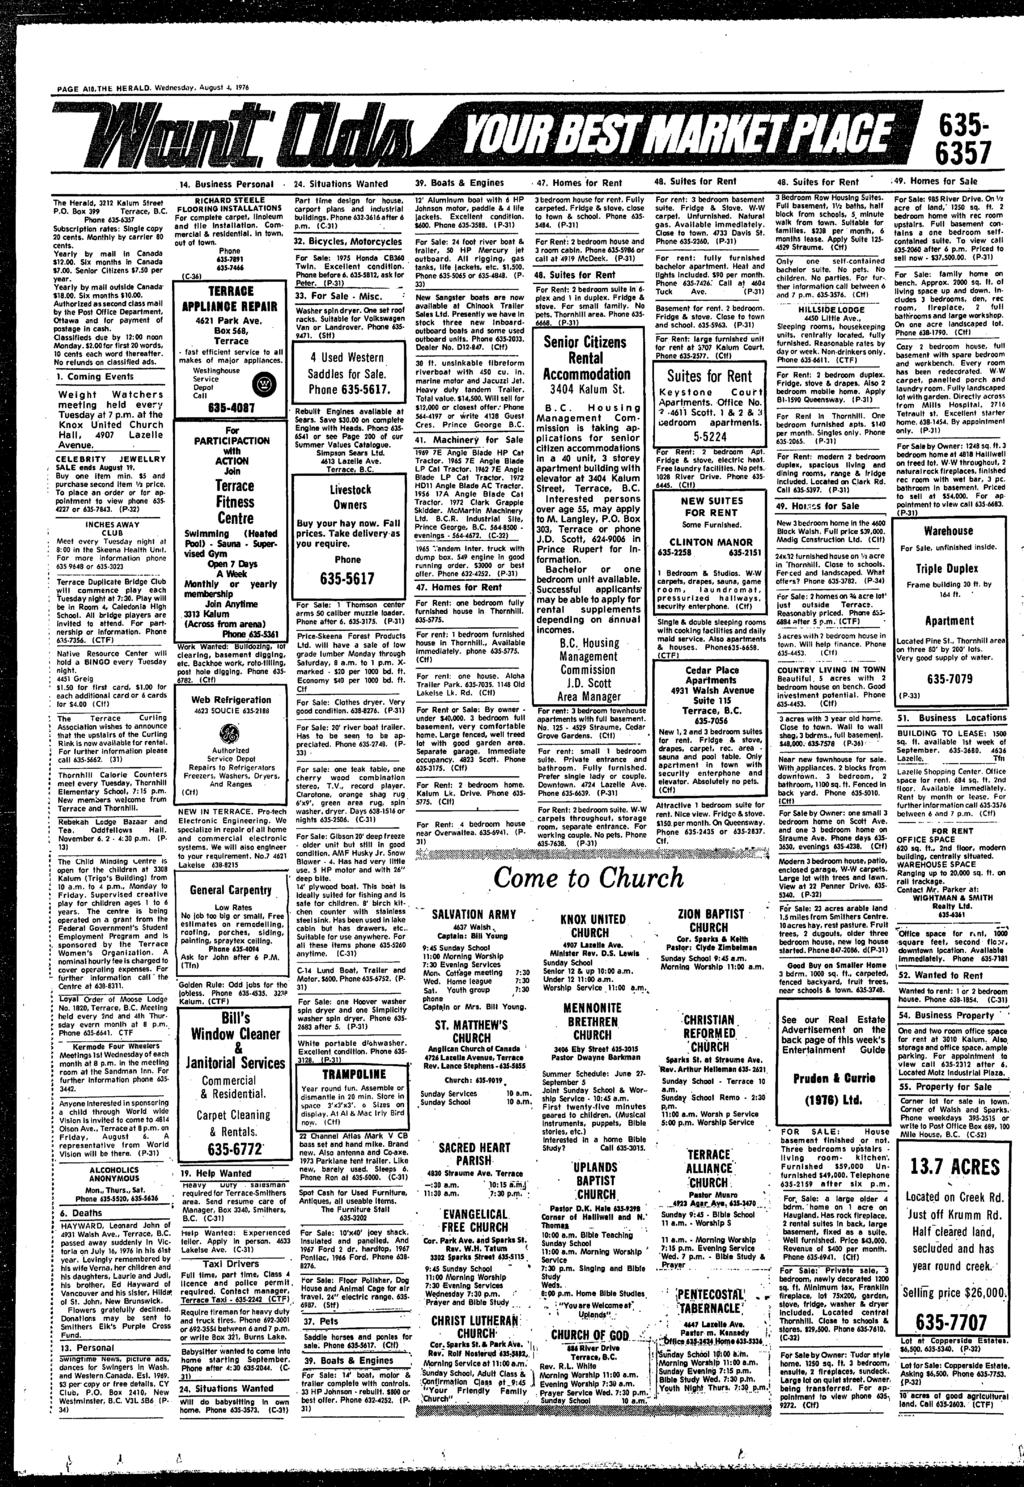 PAGE AO,THE HERALD. Wednesday, August 4, 1976 The Herald, 3212 Kalum Street P.O. Box 399 Terrace, B.C. Phone 635.6357 Subscrpton rates: Slngle copy 20 cents. Monthly by carder 80 cents.